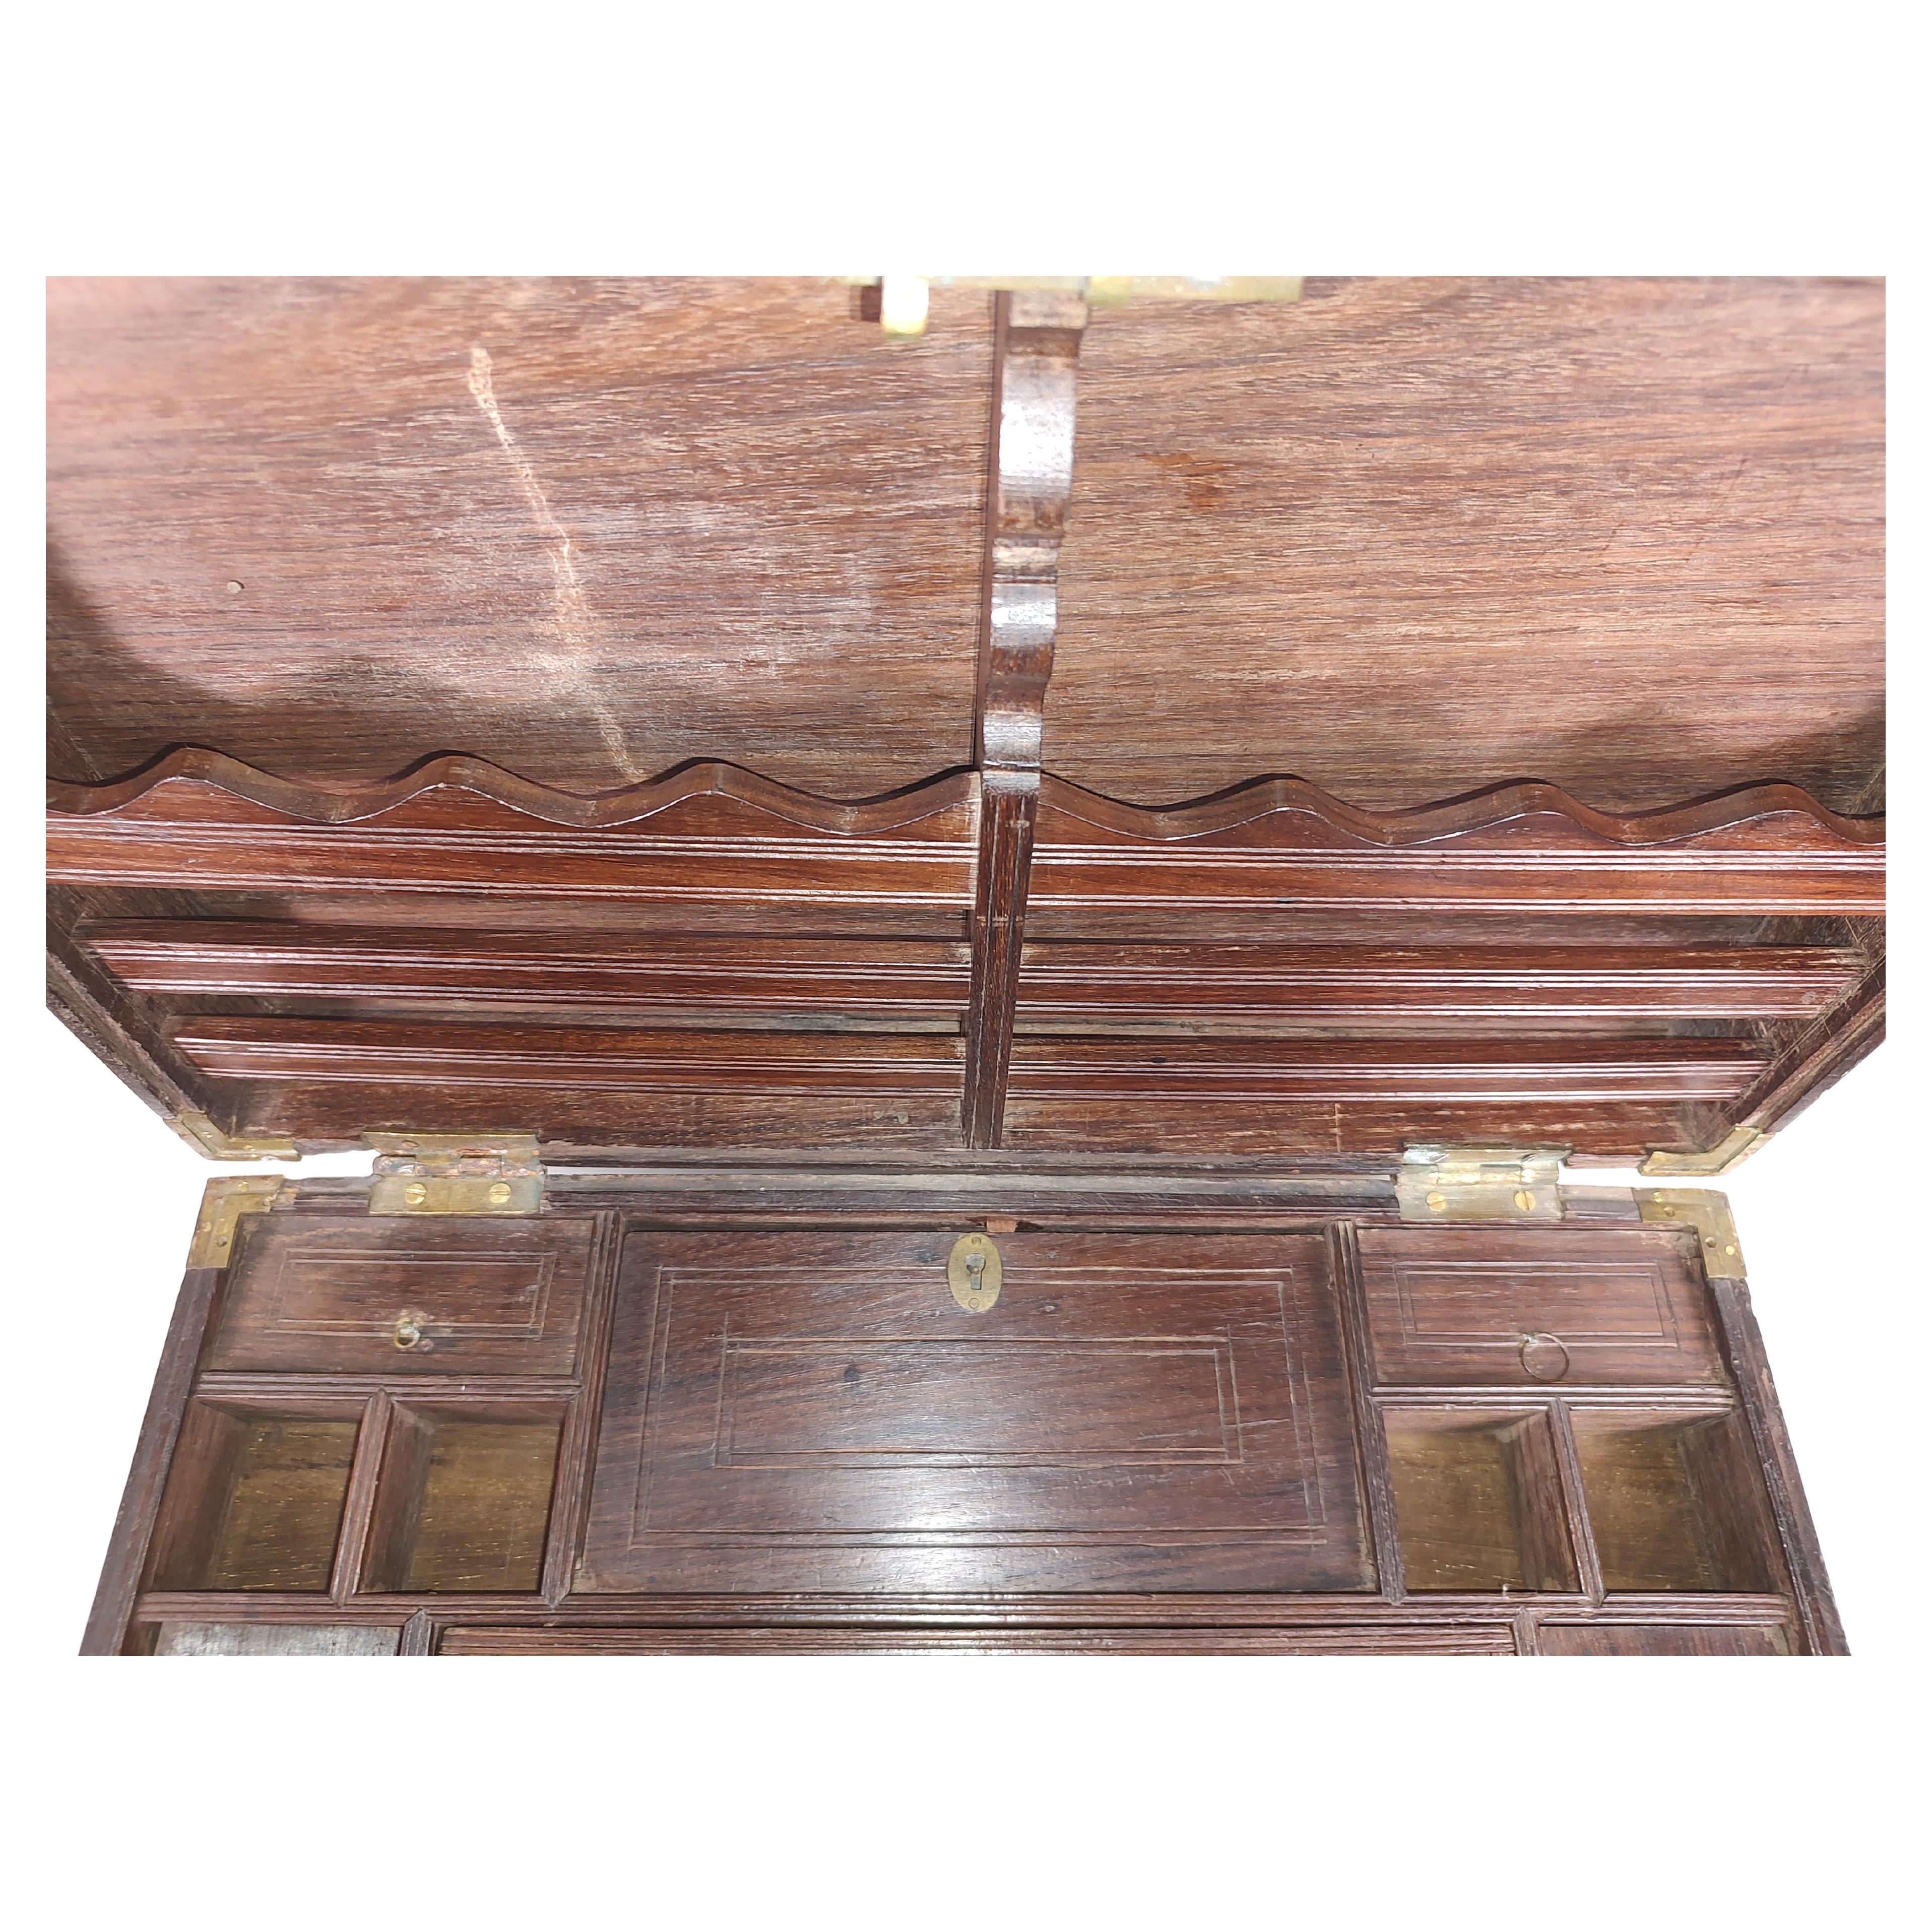 Fabulous and large rosewood and teak fitted letter writing box with brass inlay. Numerous cubbies with lids for various items. Slotted back panel for paper. Brass handles and a working lock and key. In excellent antique condition with minimal wear.